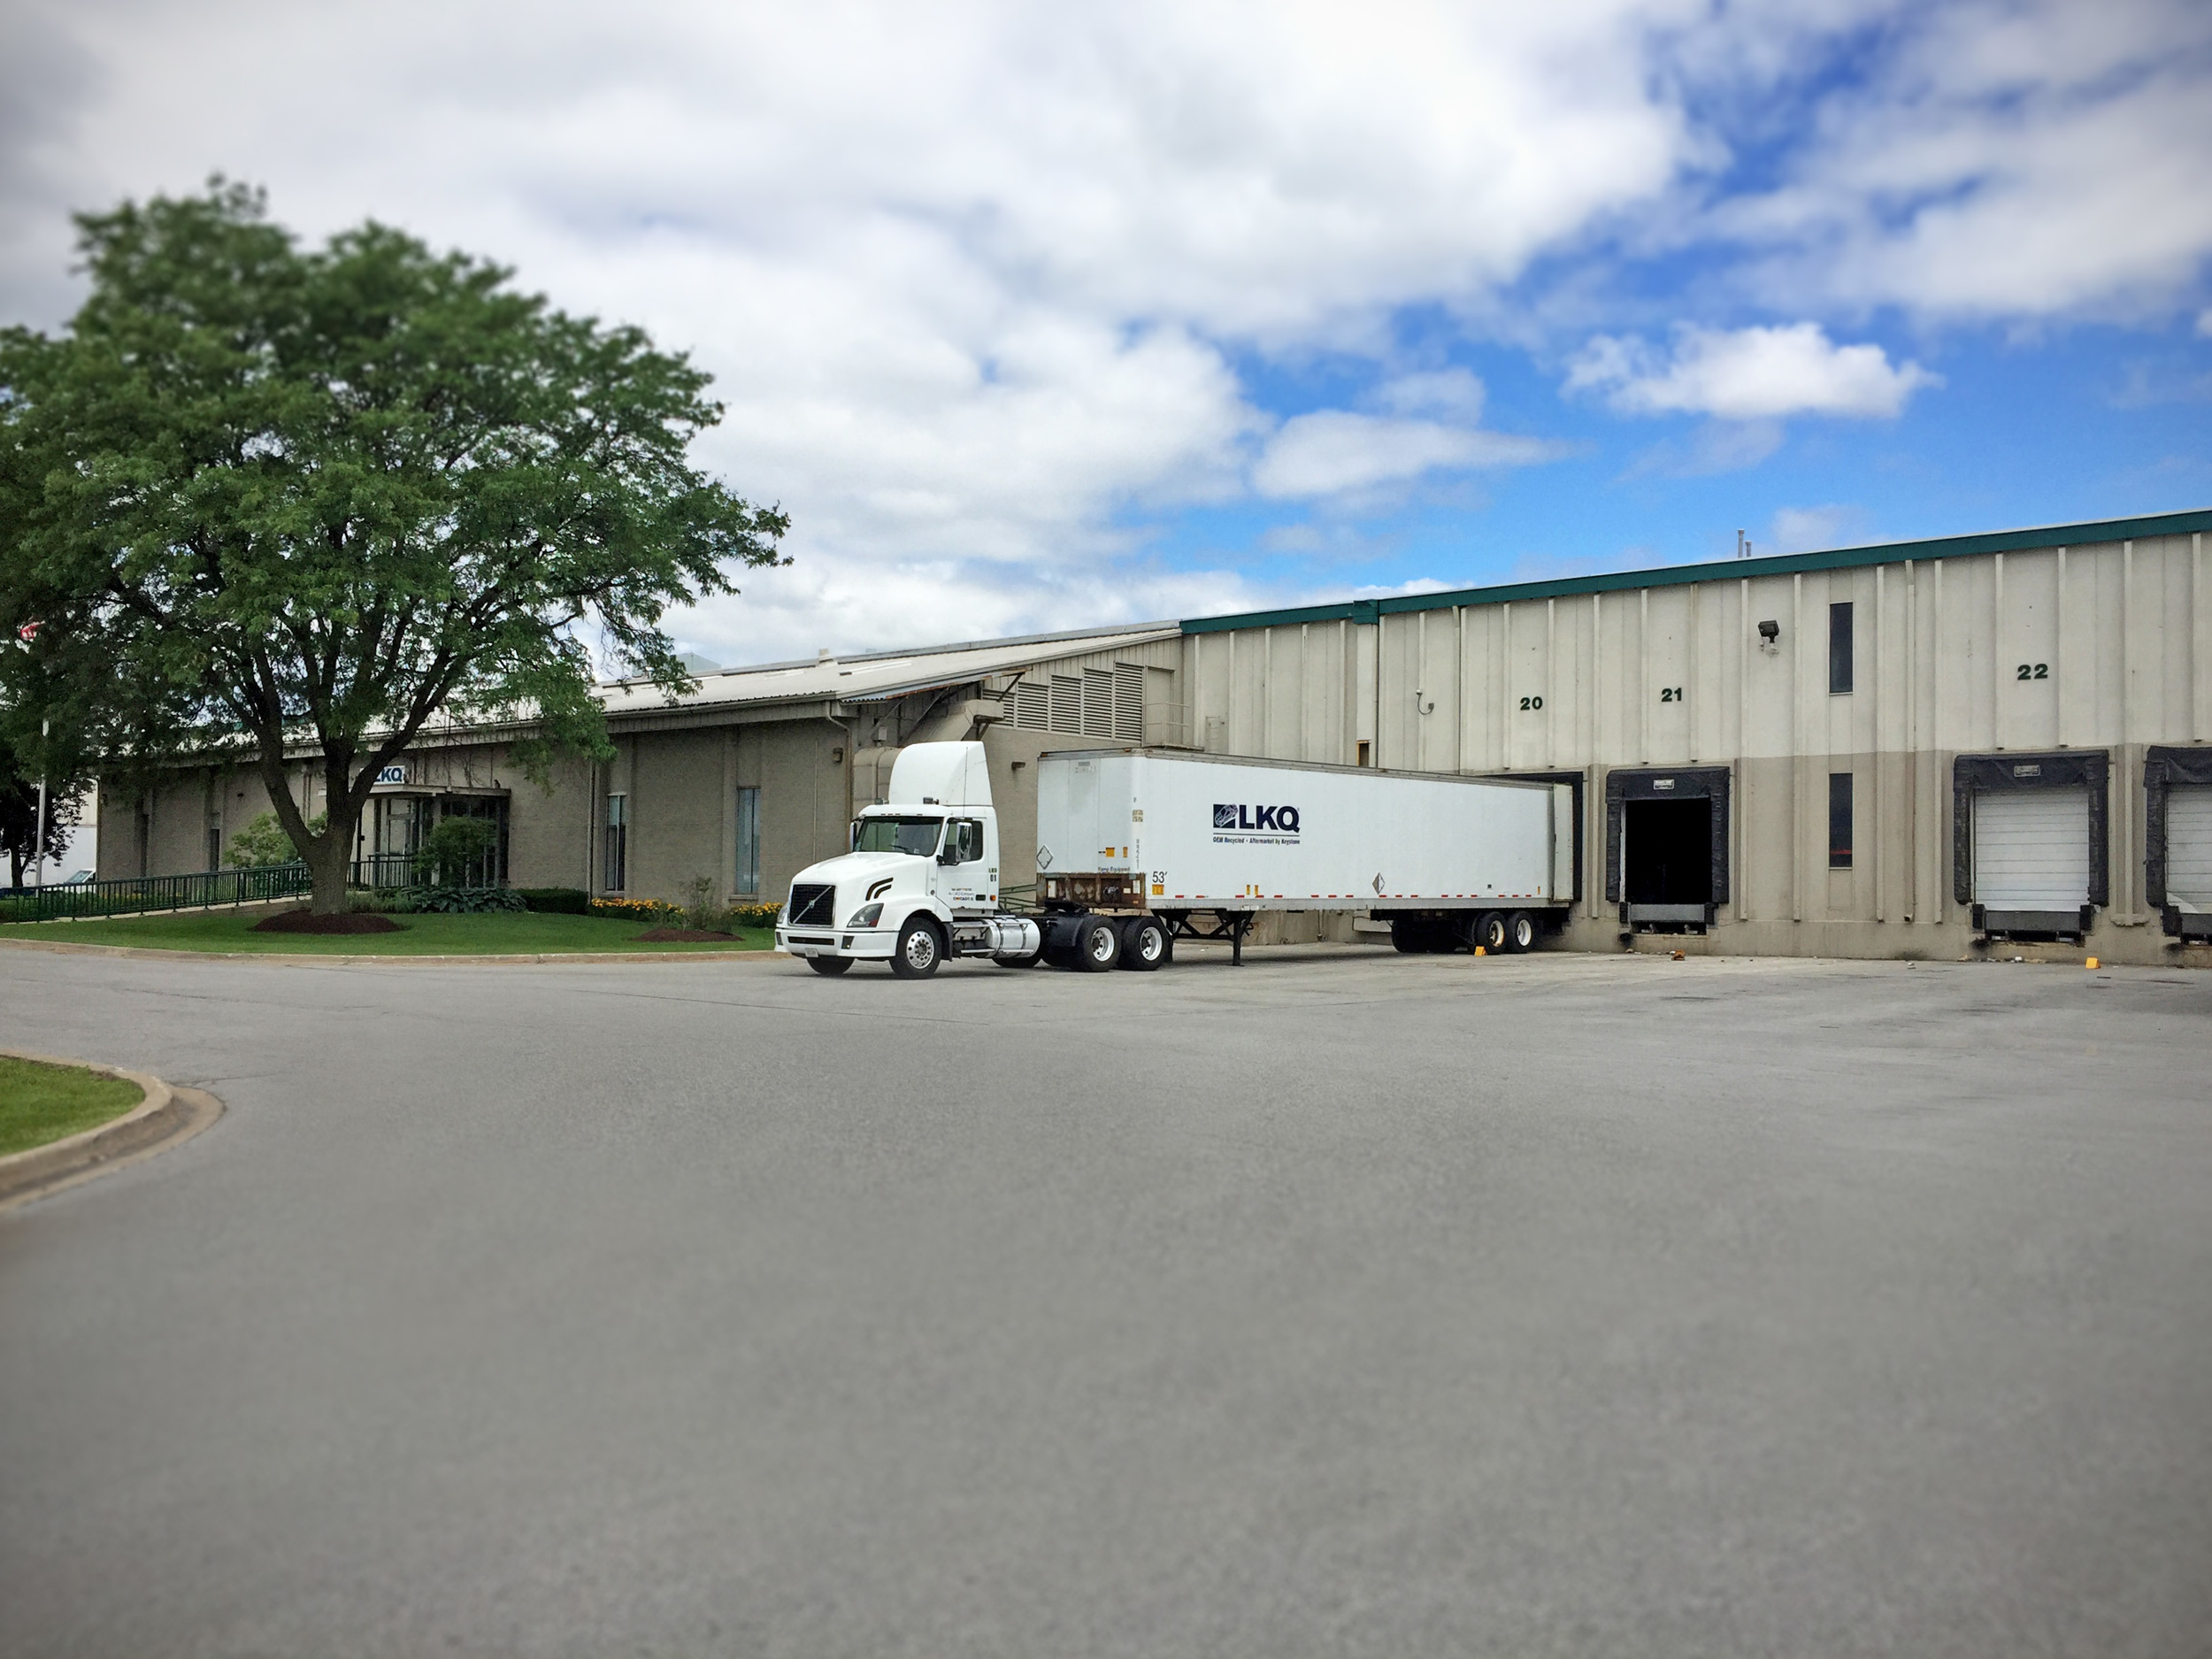 NAI Hiffman hired by Transwestern Investment Group to manage & lease 2 assets totaling 627,000 SF